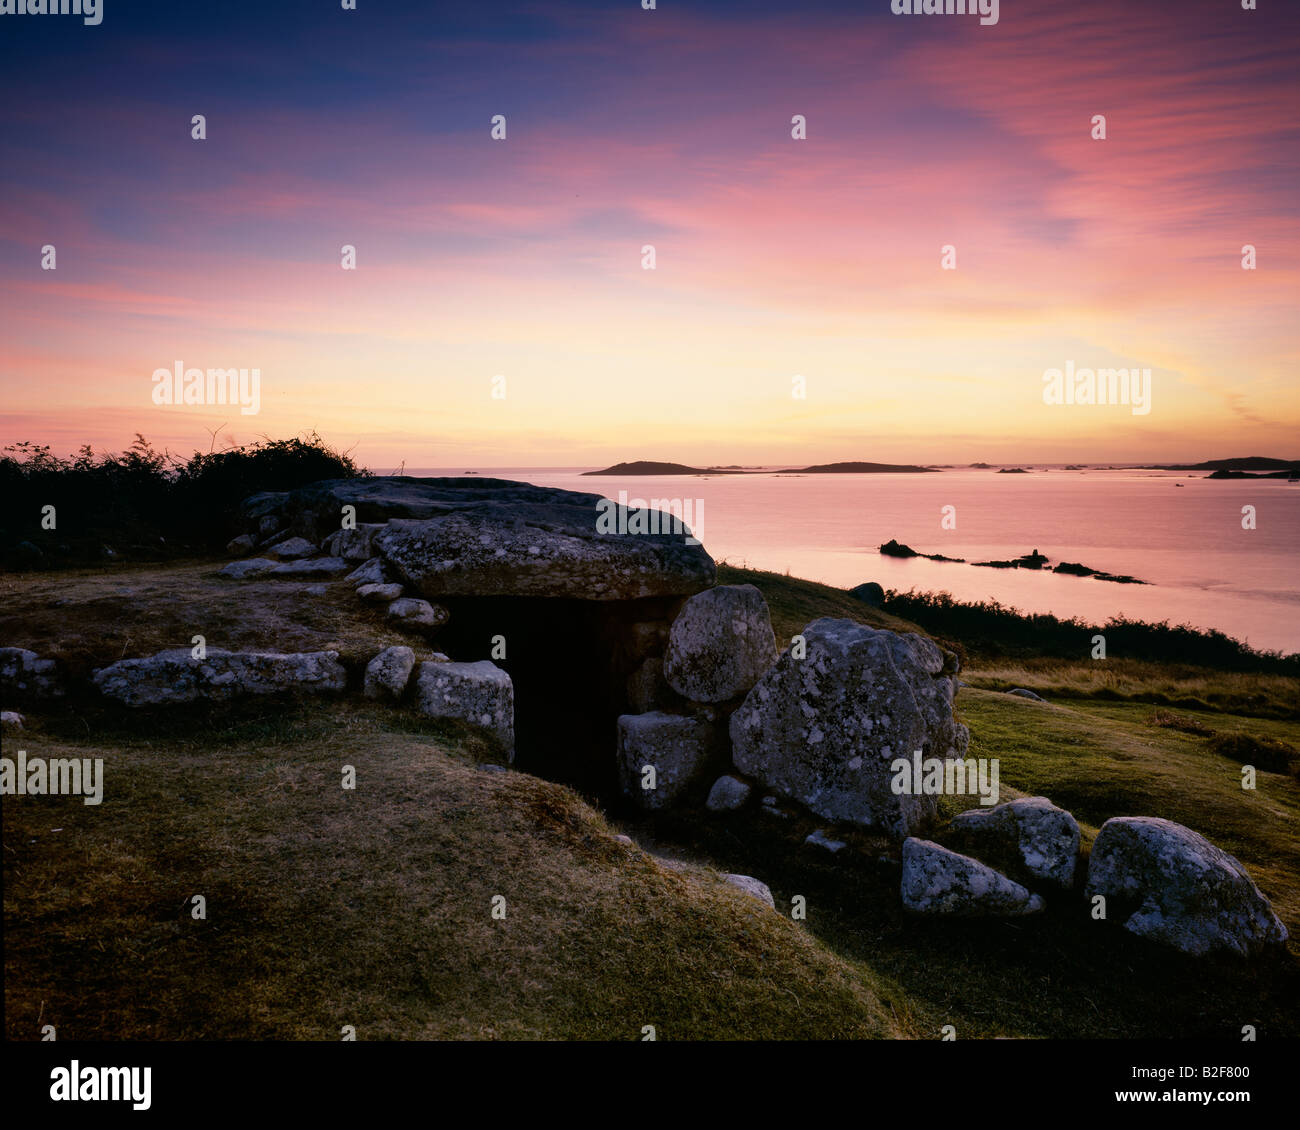 Evening view of Bant's Burial Chamber, St Mary's, Isles of Scilly. Cornwall. United Kingdom. Stock Photo